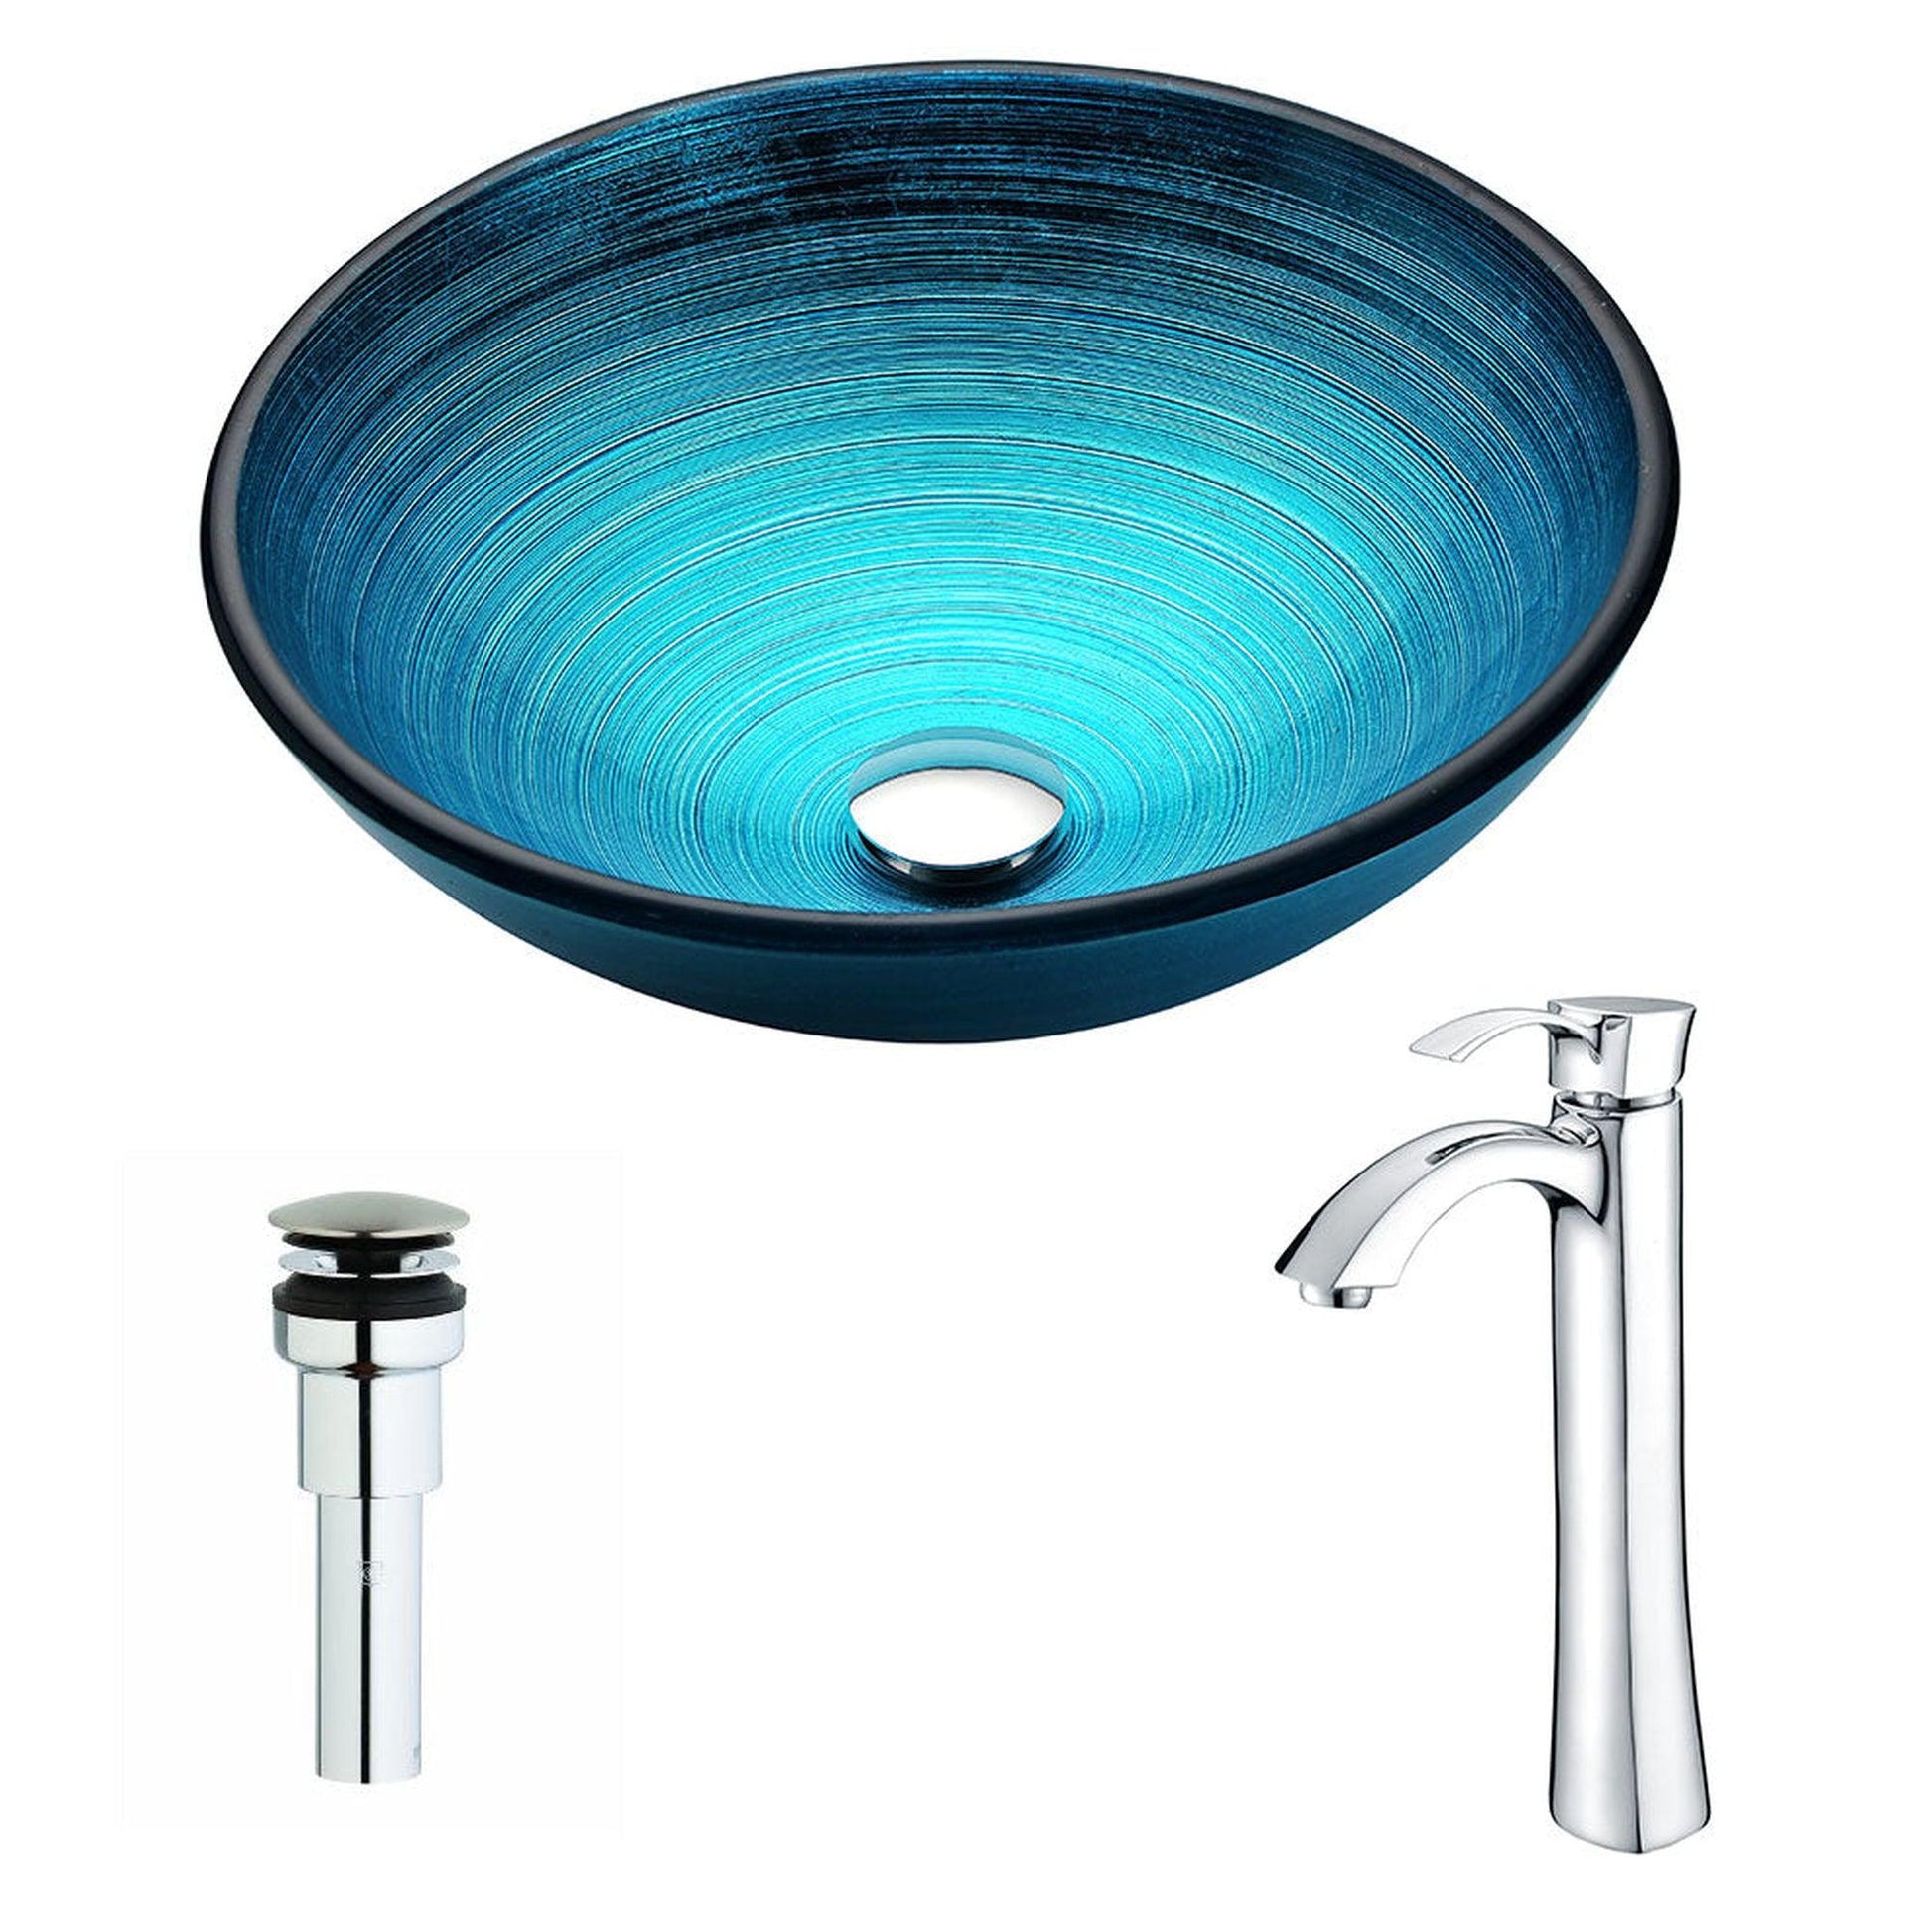 ANZZI Enti Series 17" x 17" Round Lustrous Blue Deco-Glass Vessel Sink With Chrome Pop-Up Drain and Harmony Faucet